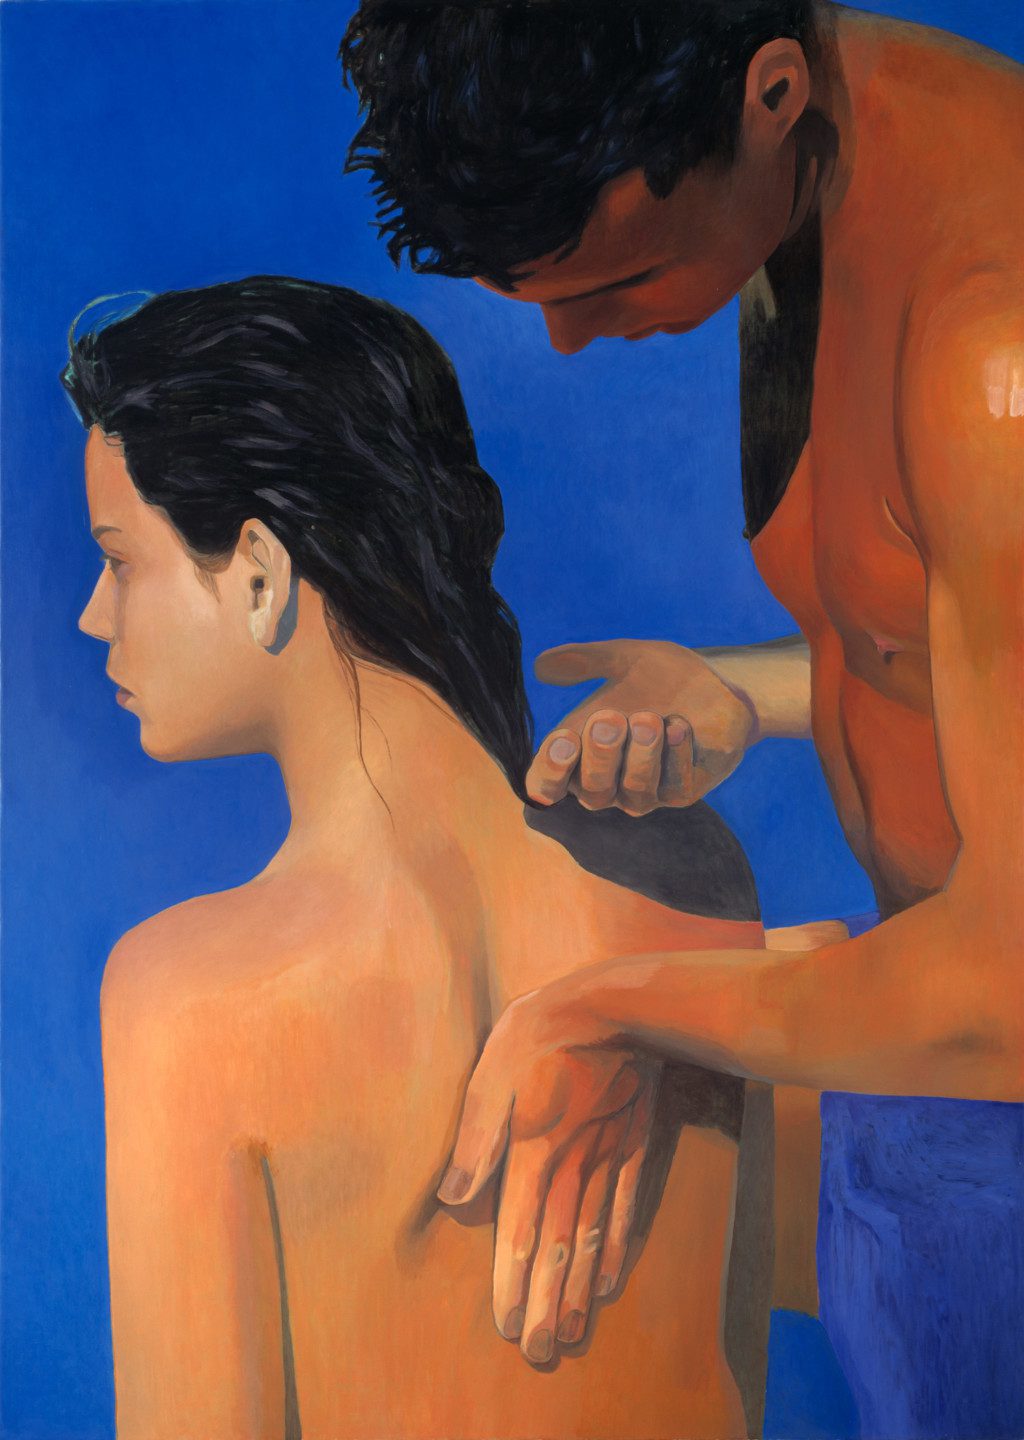 Painting. A man strokes a woman's back.